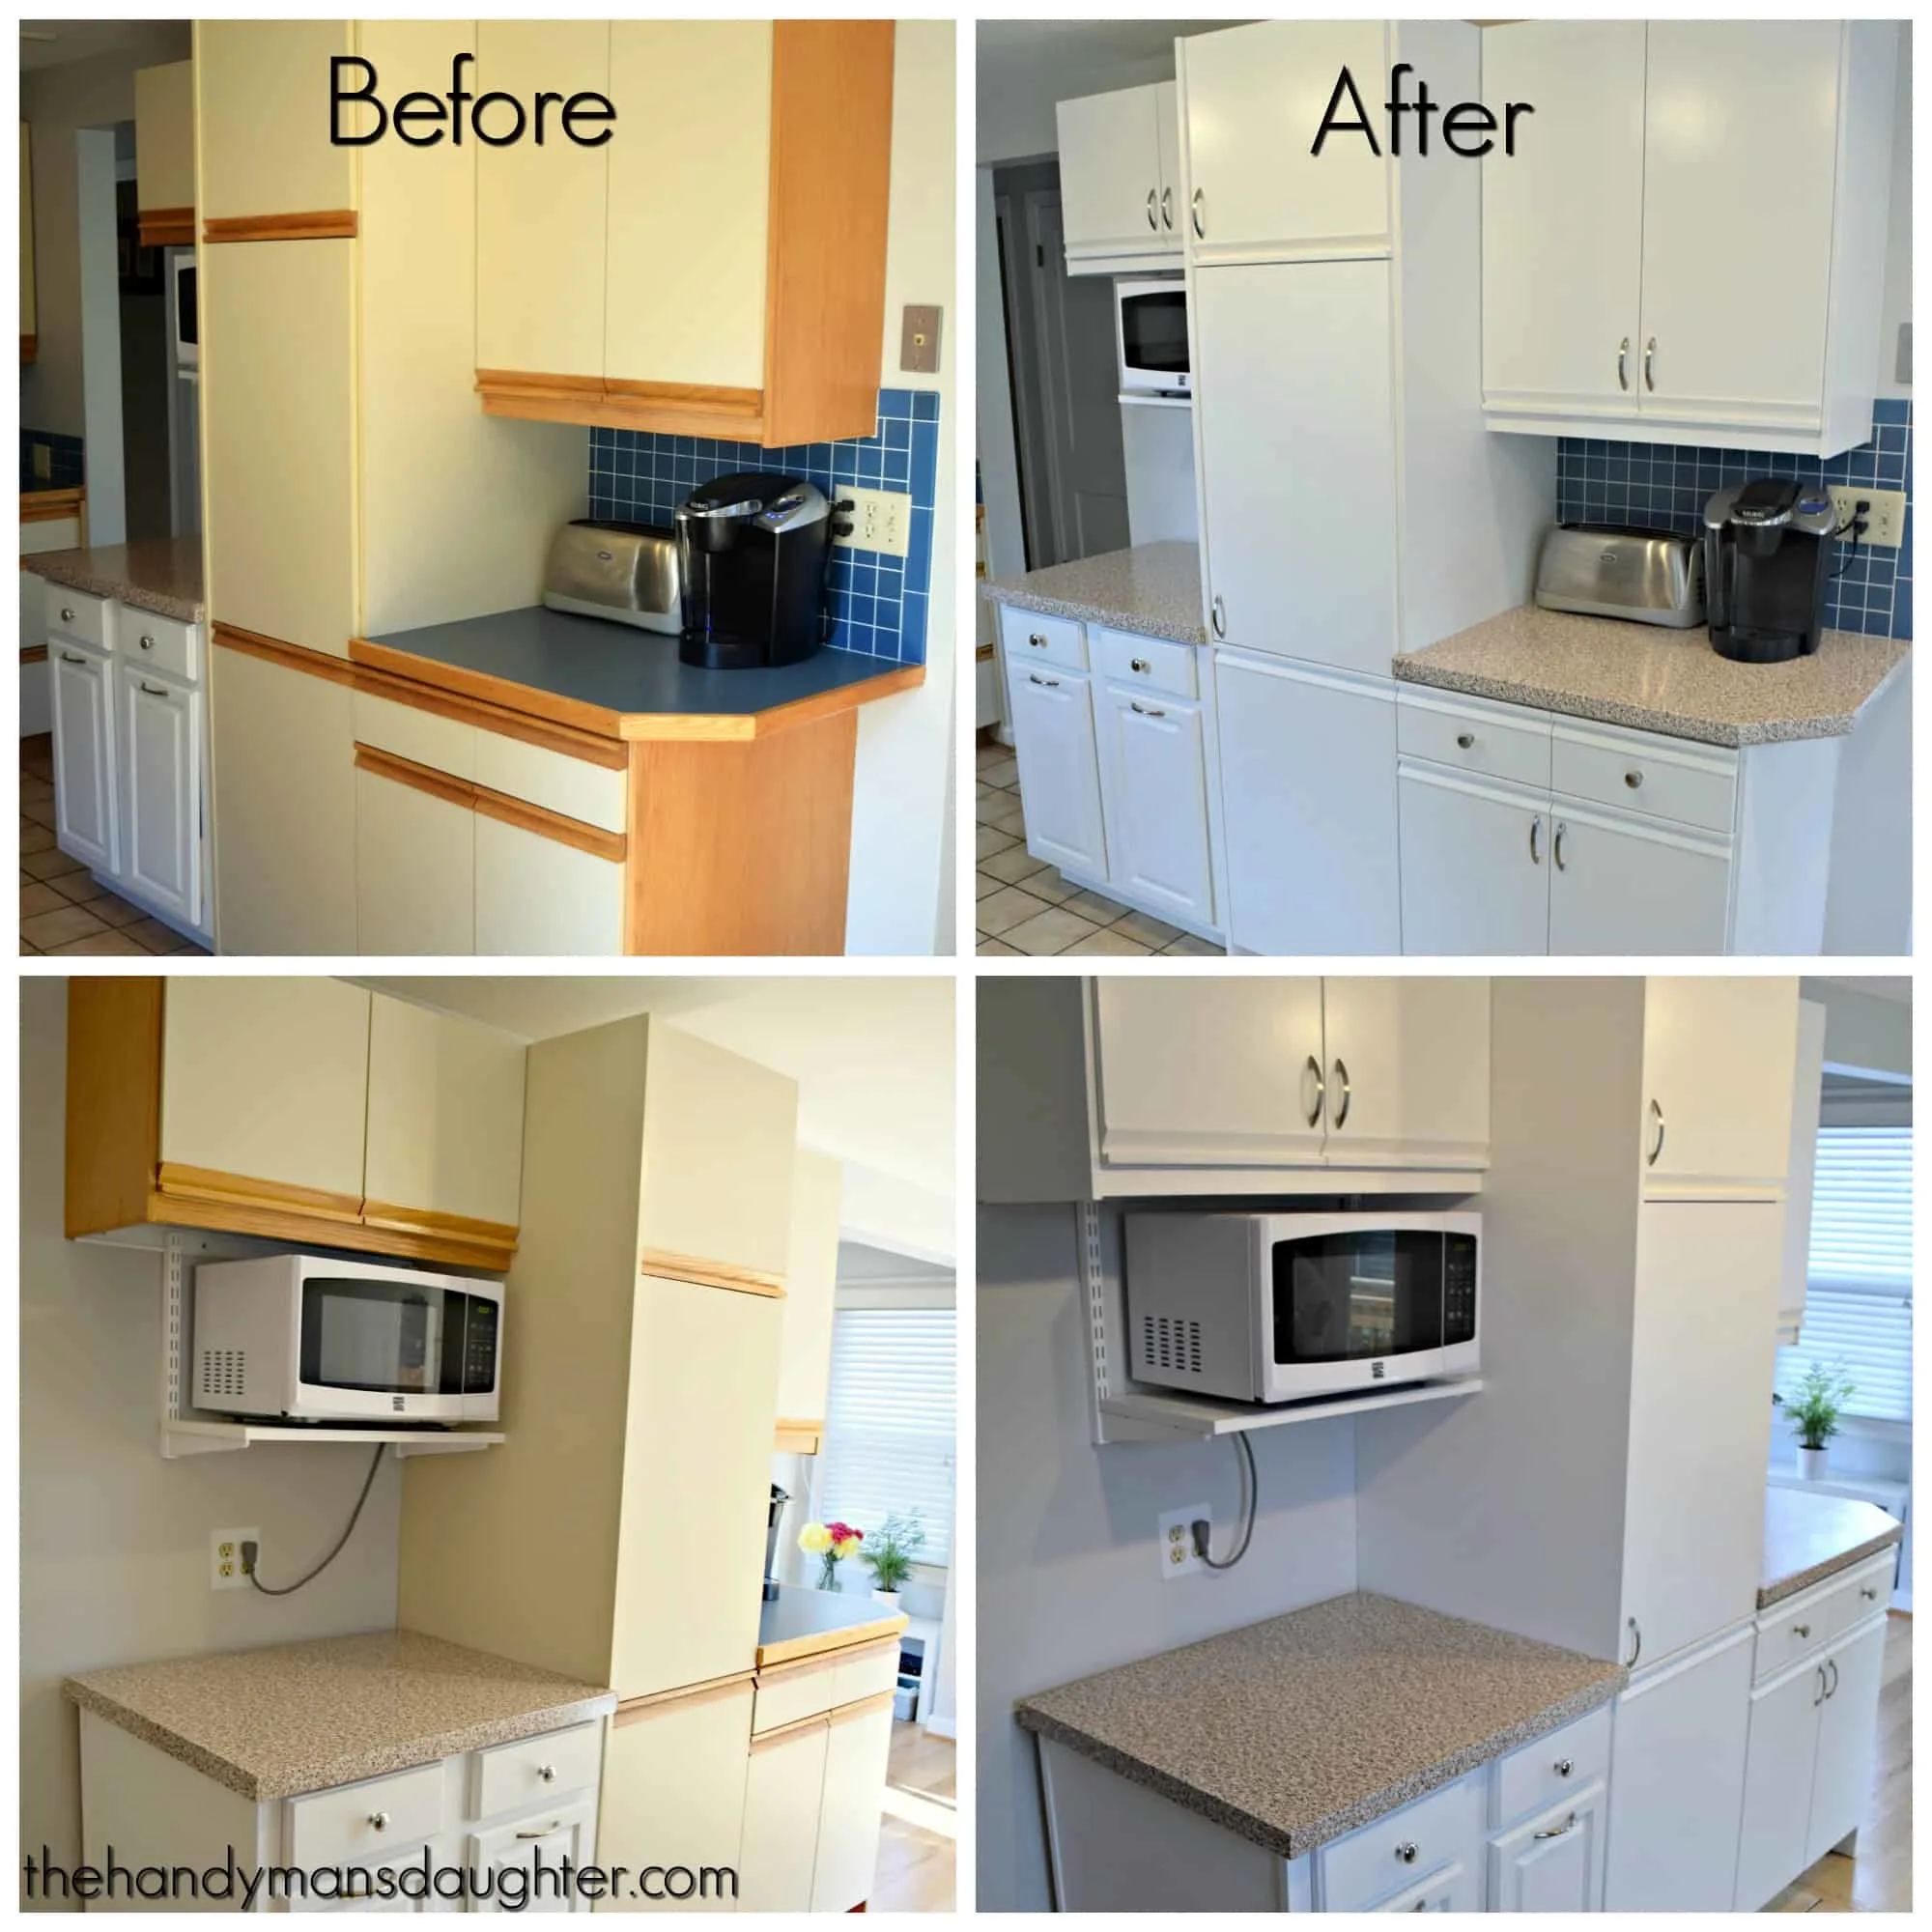 Tips For Updating Melamine Cabinets, Remove Laminate Kitchen Cabinets